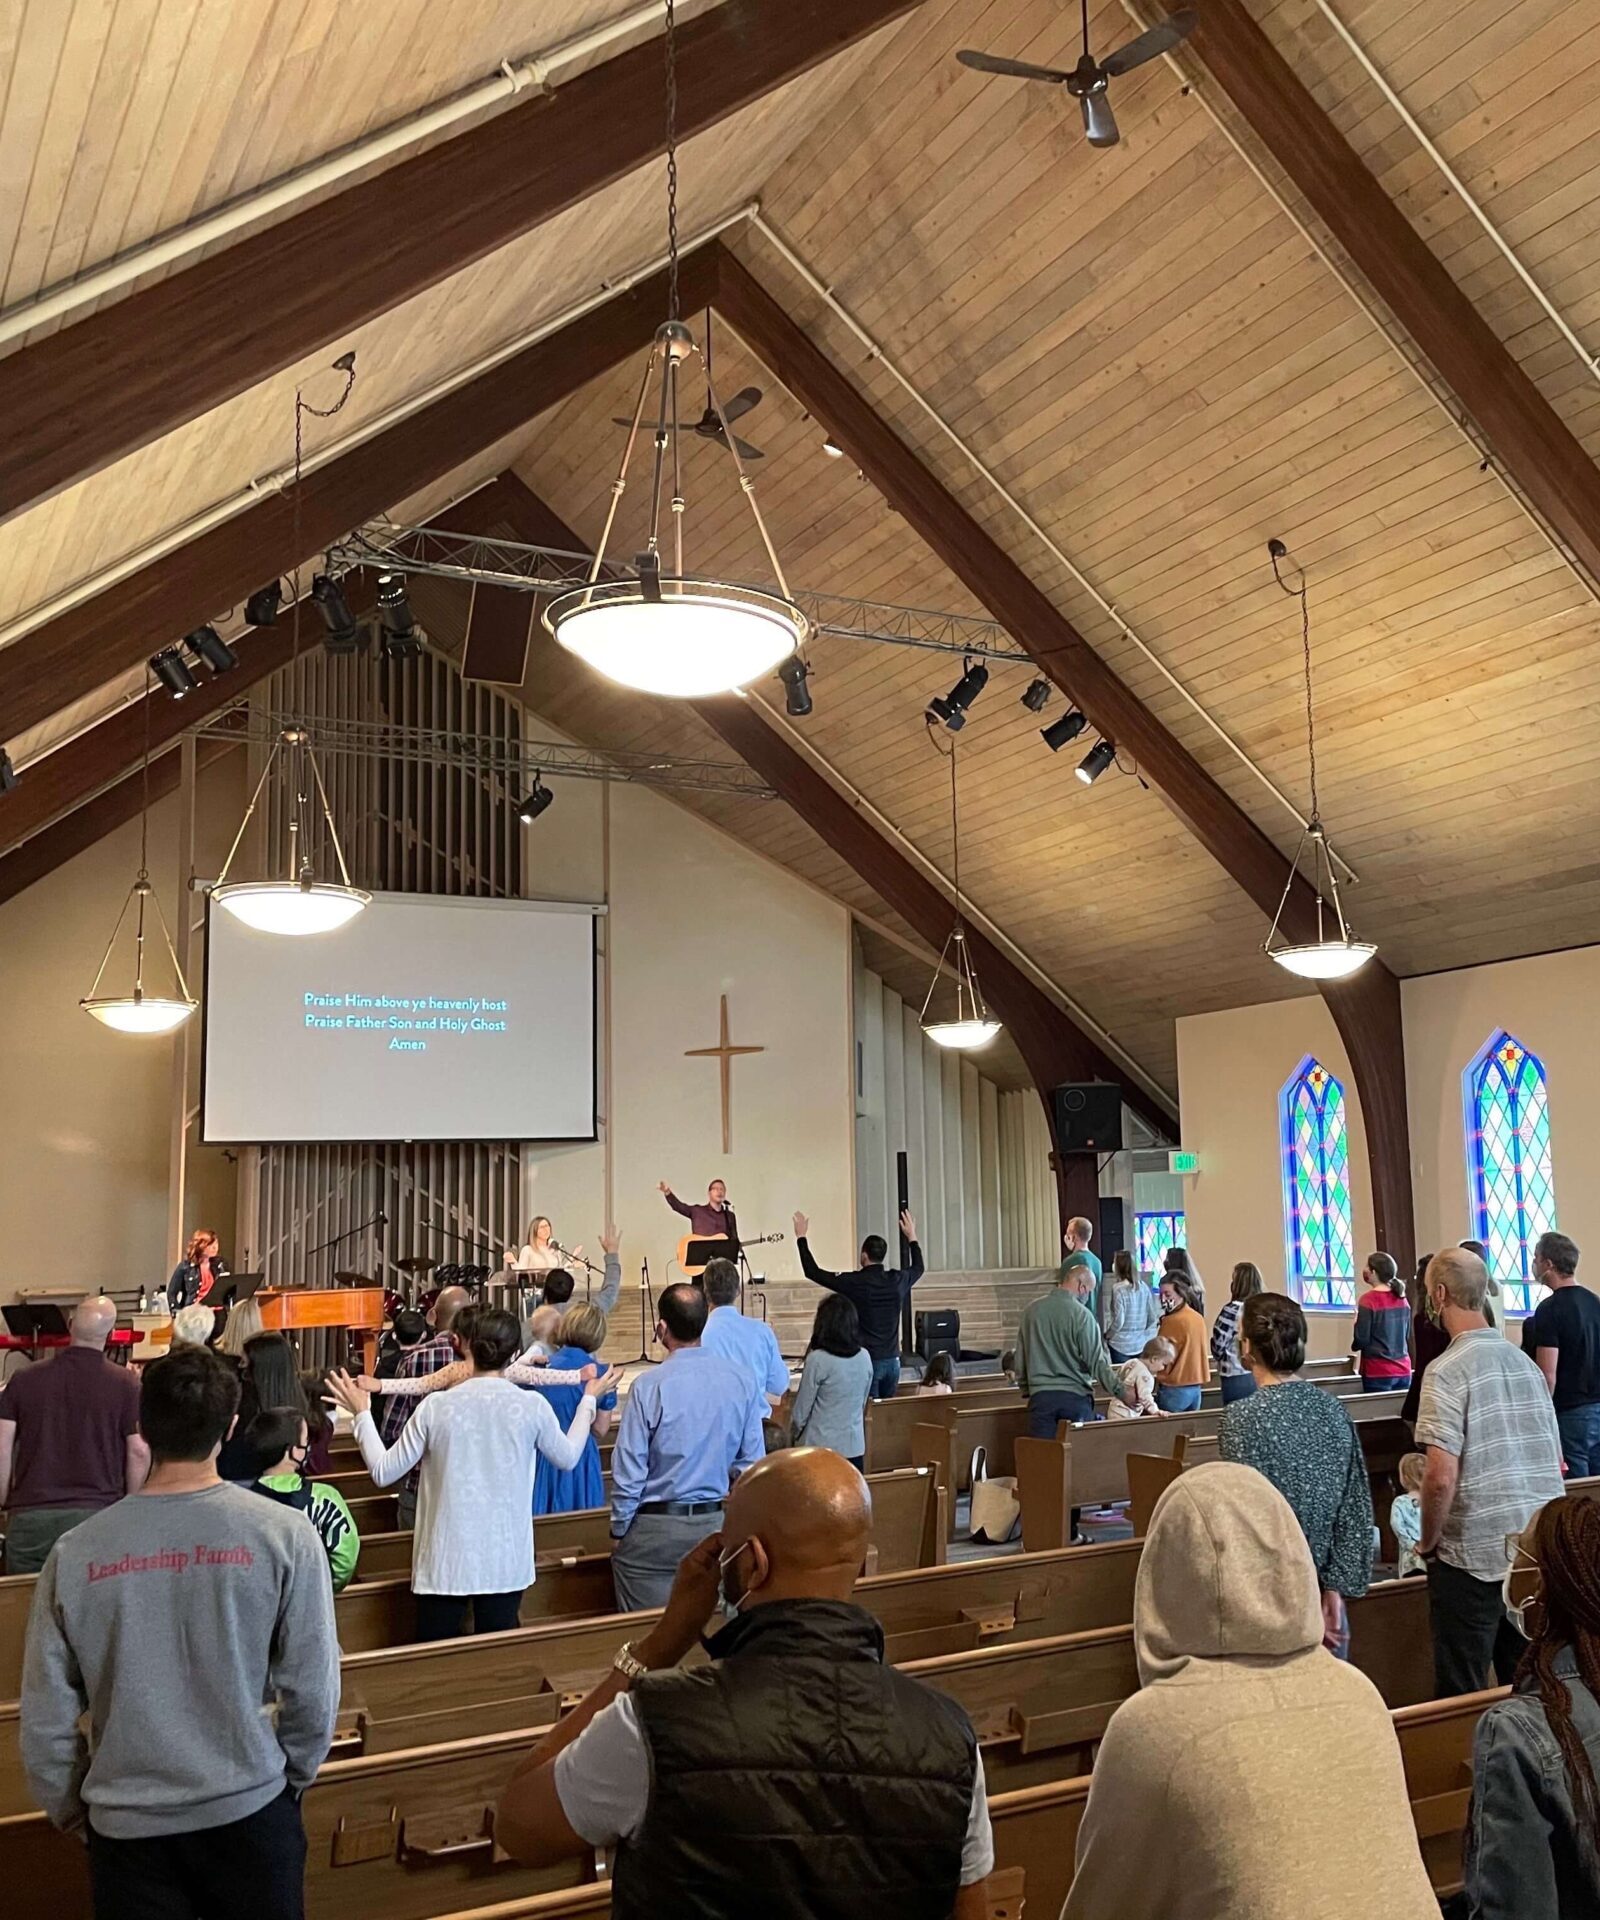 people raising hands in worship in a church sanctuary